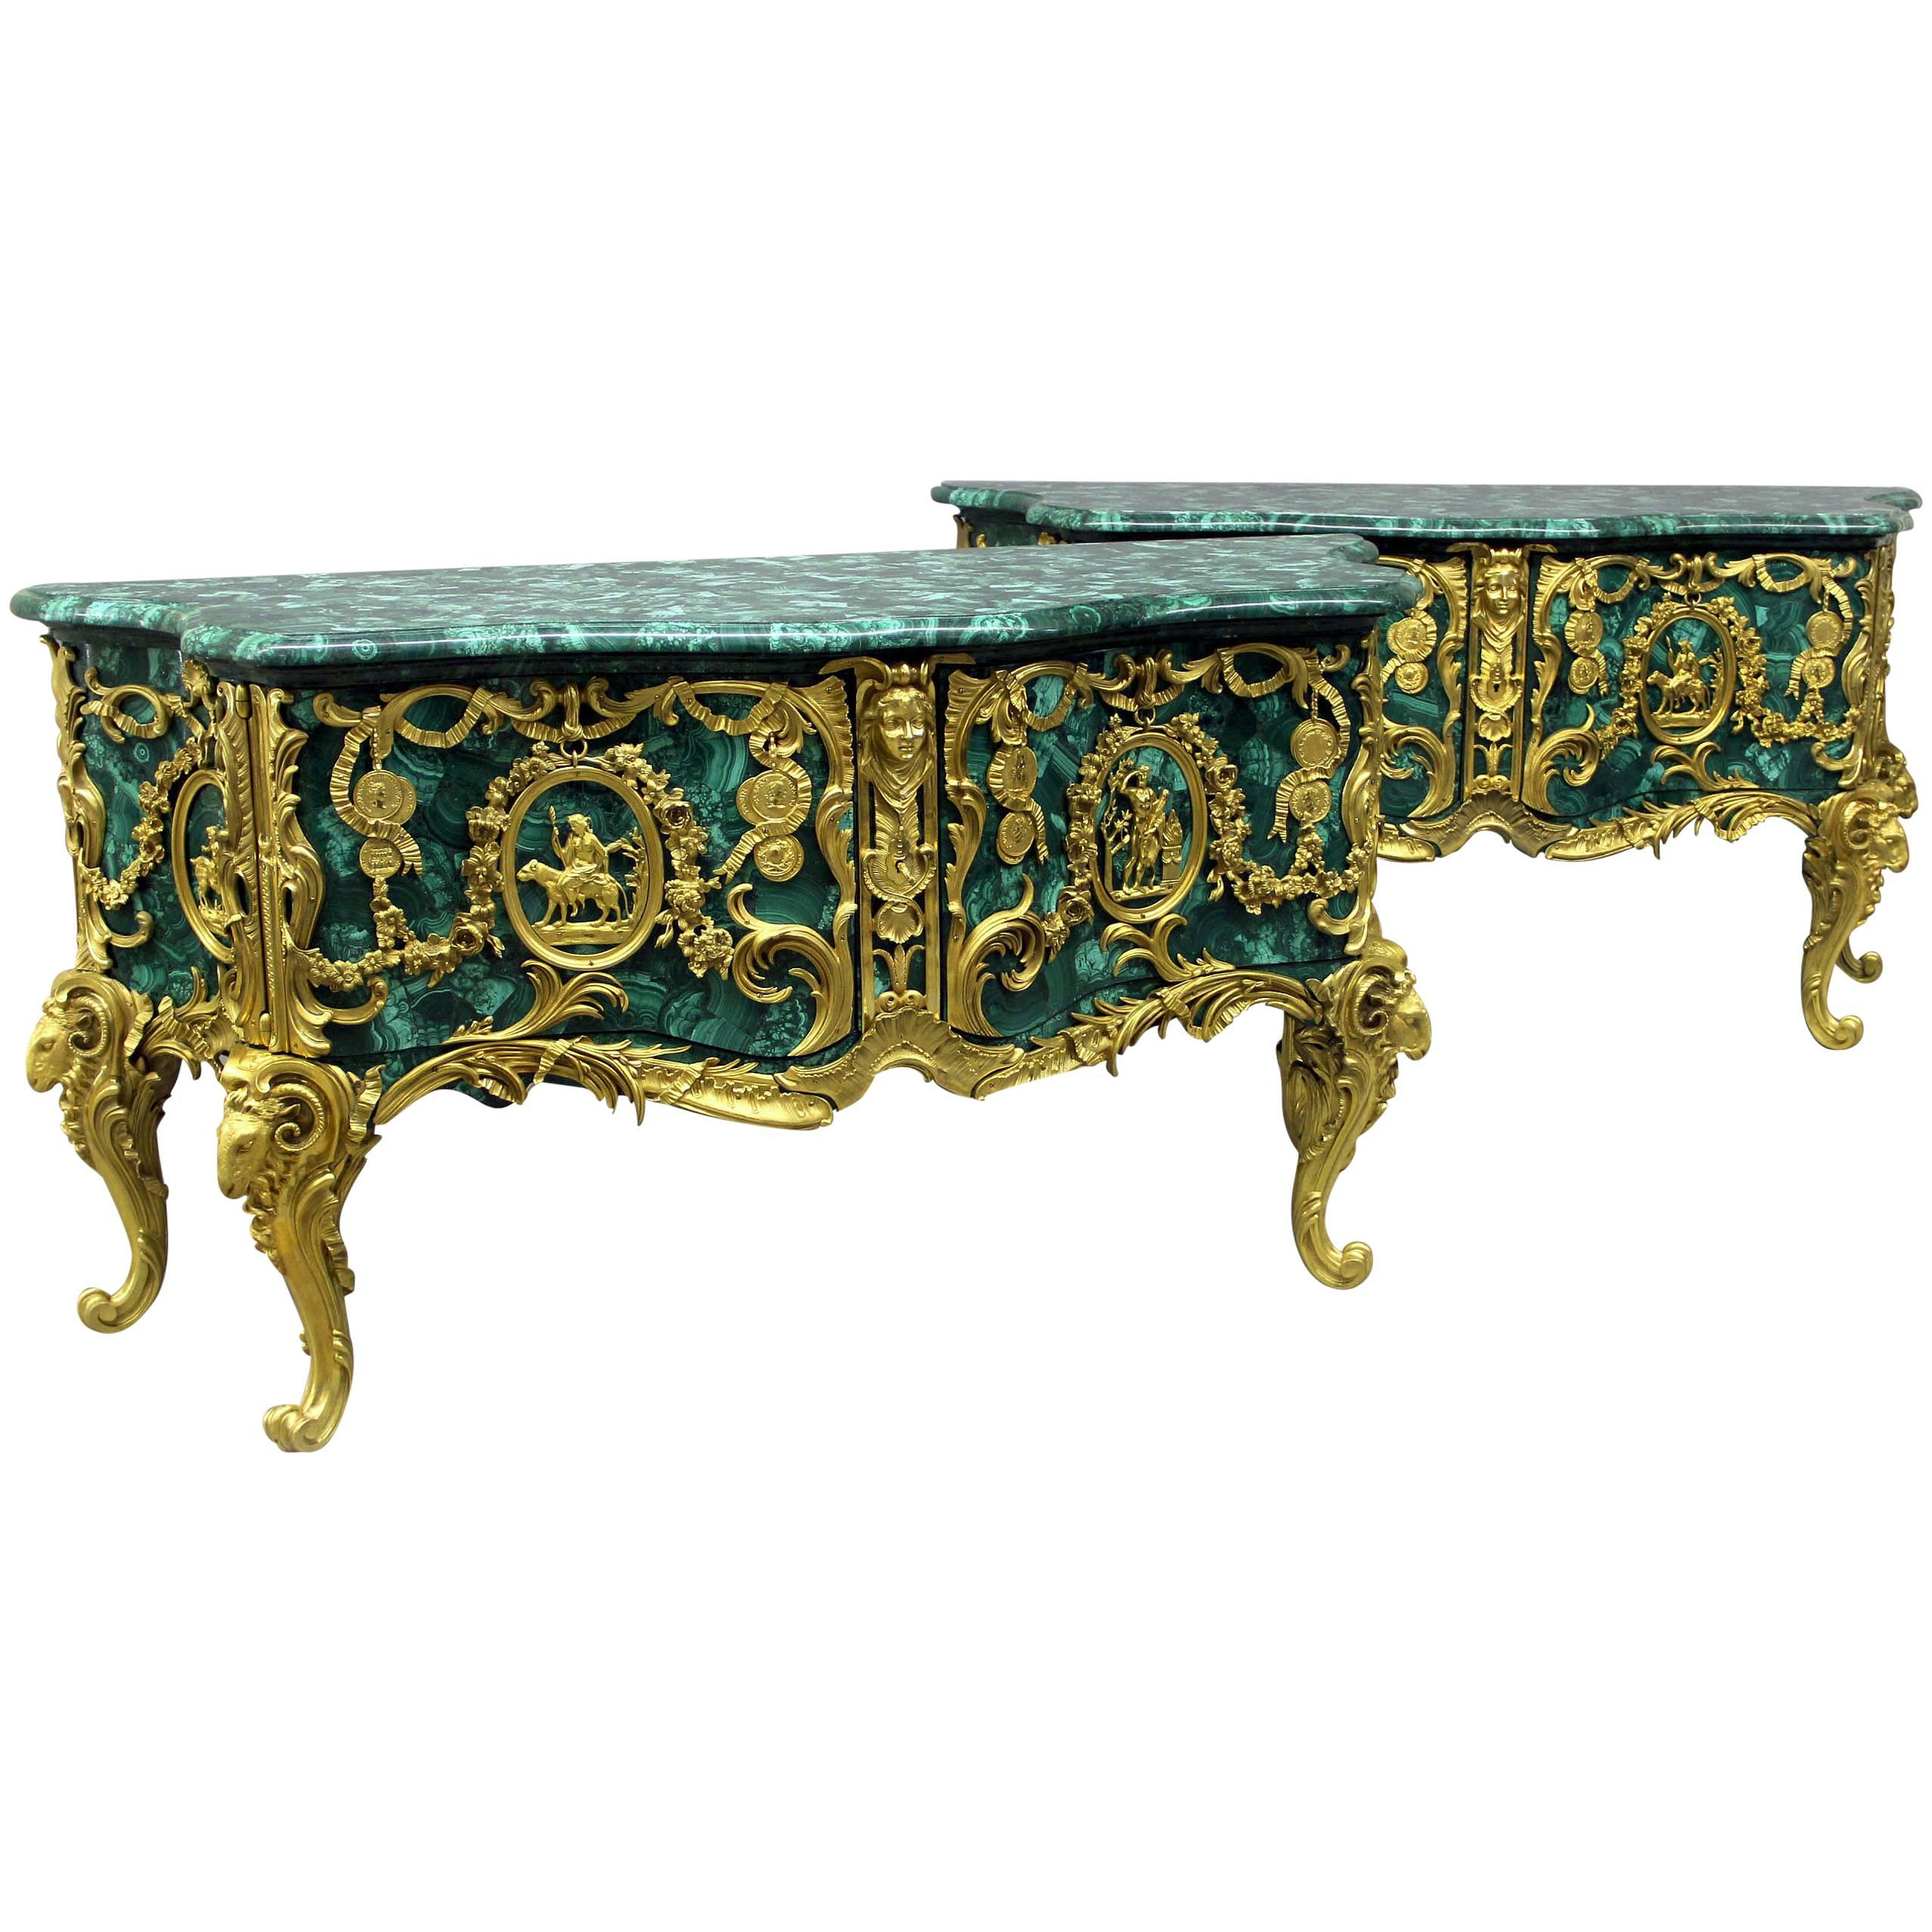 Pair of Late 19th-Early 20th Century Gilt Bronze-Mounted Malachite Commodes